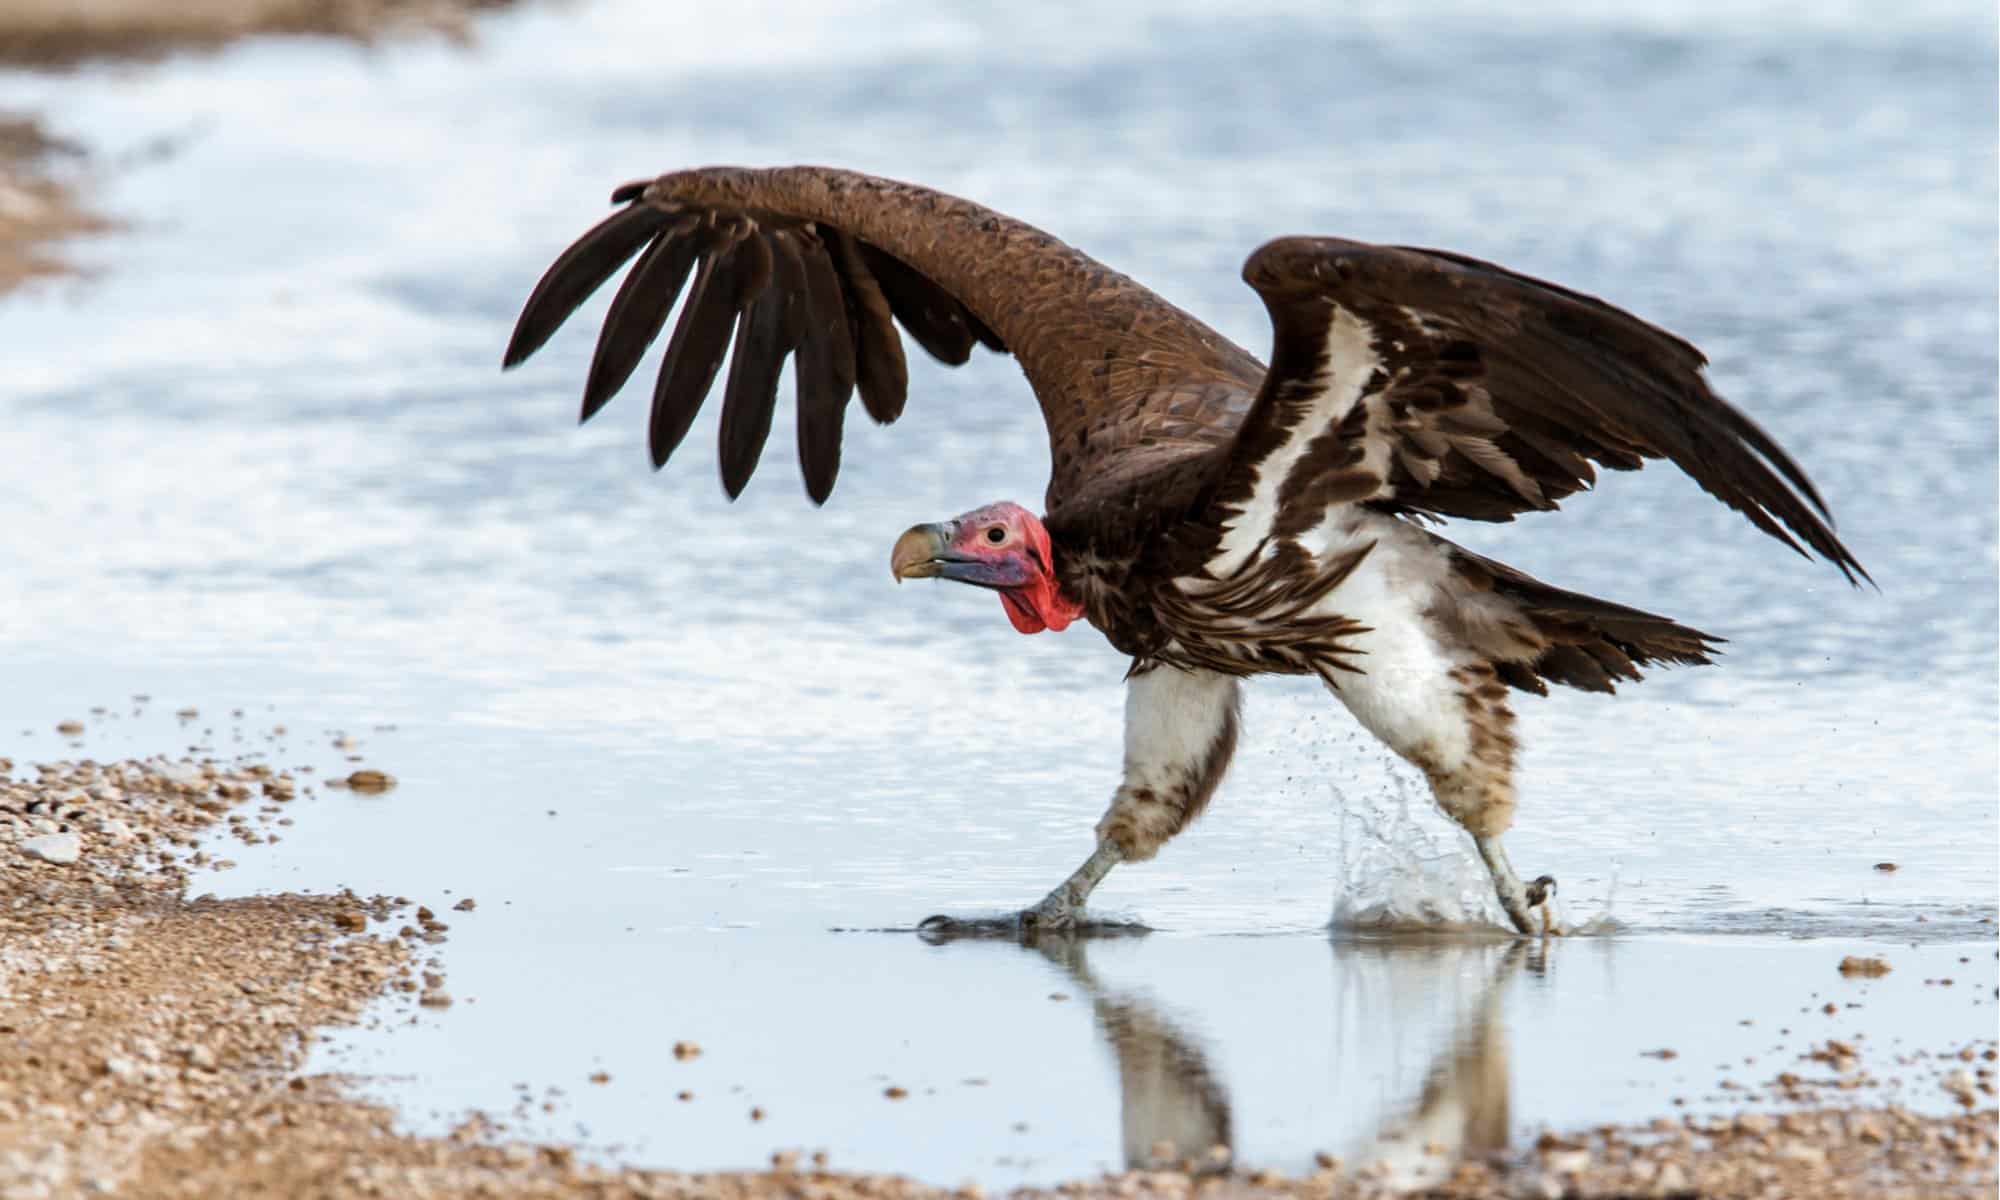 Lappet-faced Vulture walking over water in the Etosha National Park in Namibia. The bird has a black or dark brown back, white feathers on the thighs and a white or buff-brown belly partially covered by long black feathers that hang from the neck.